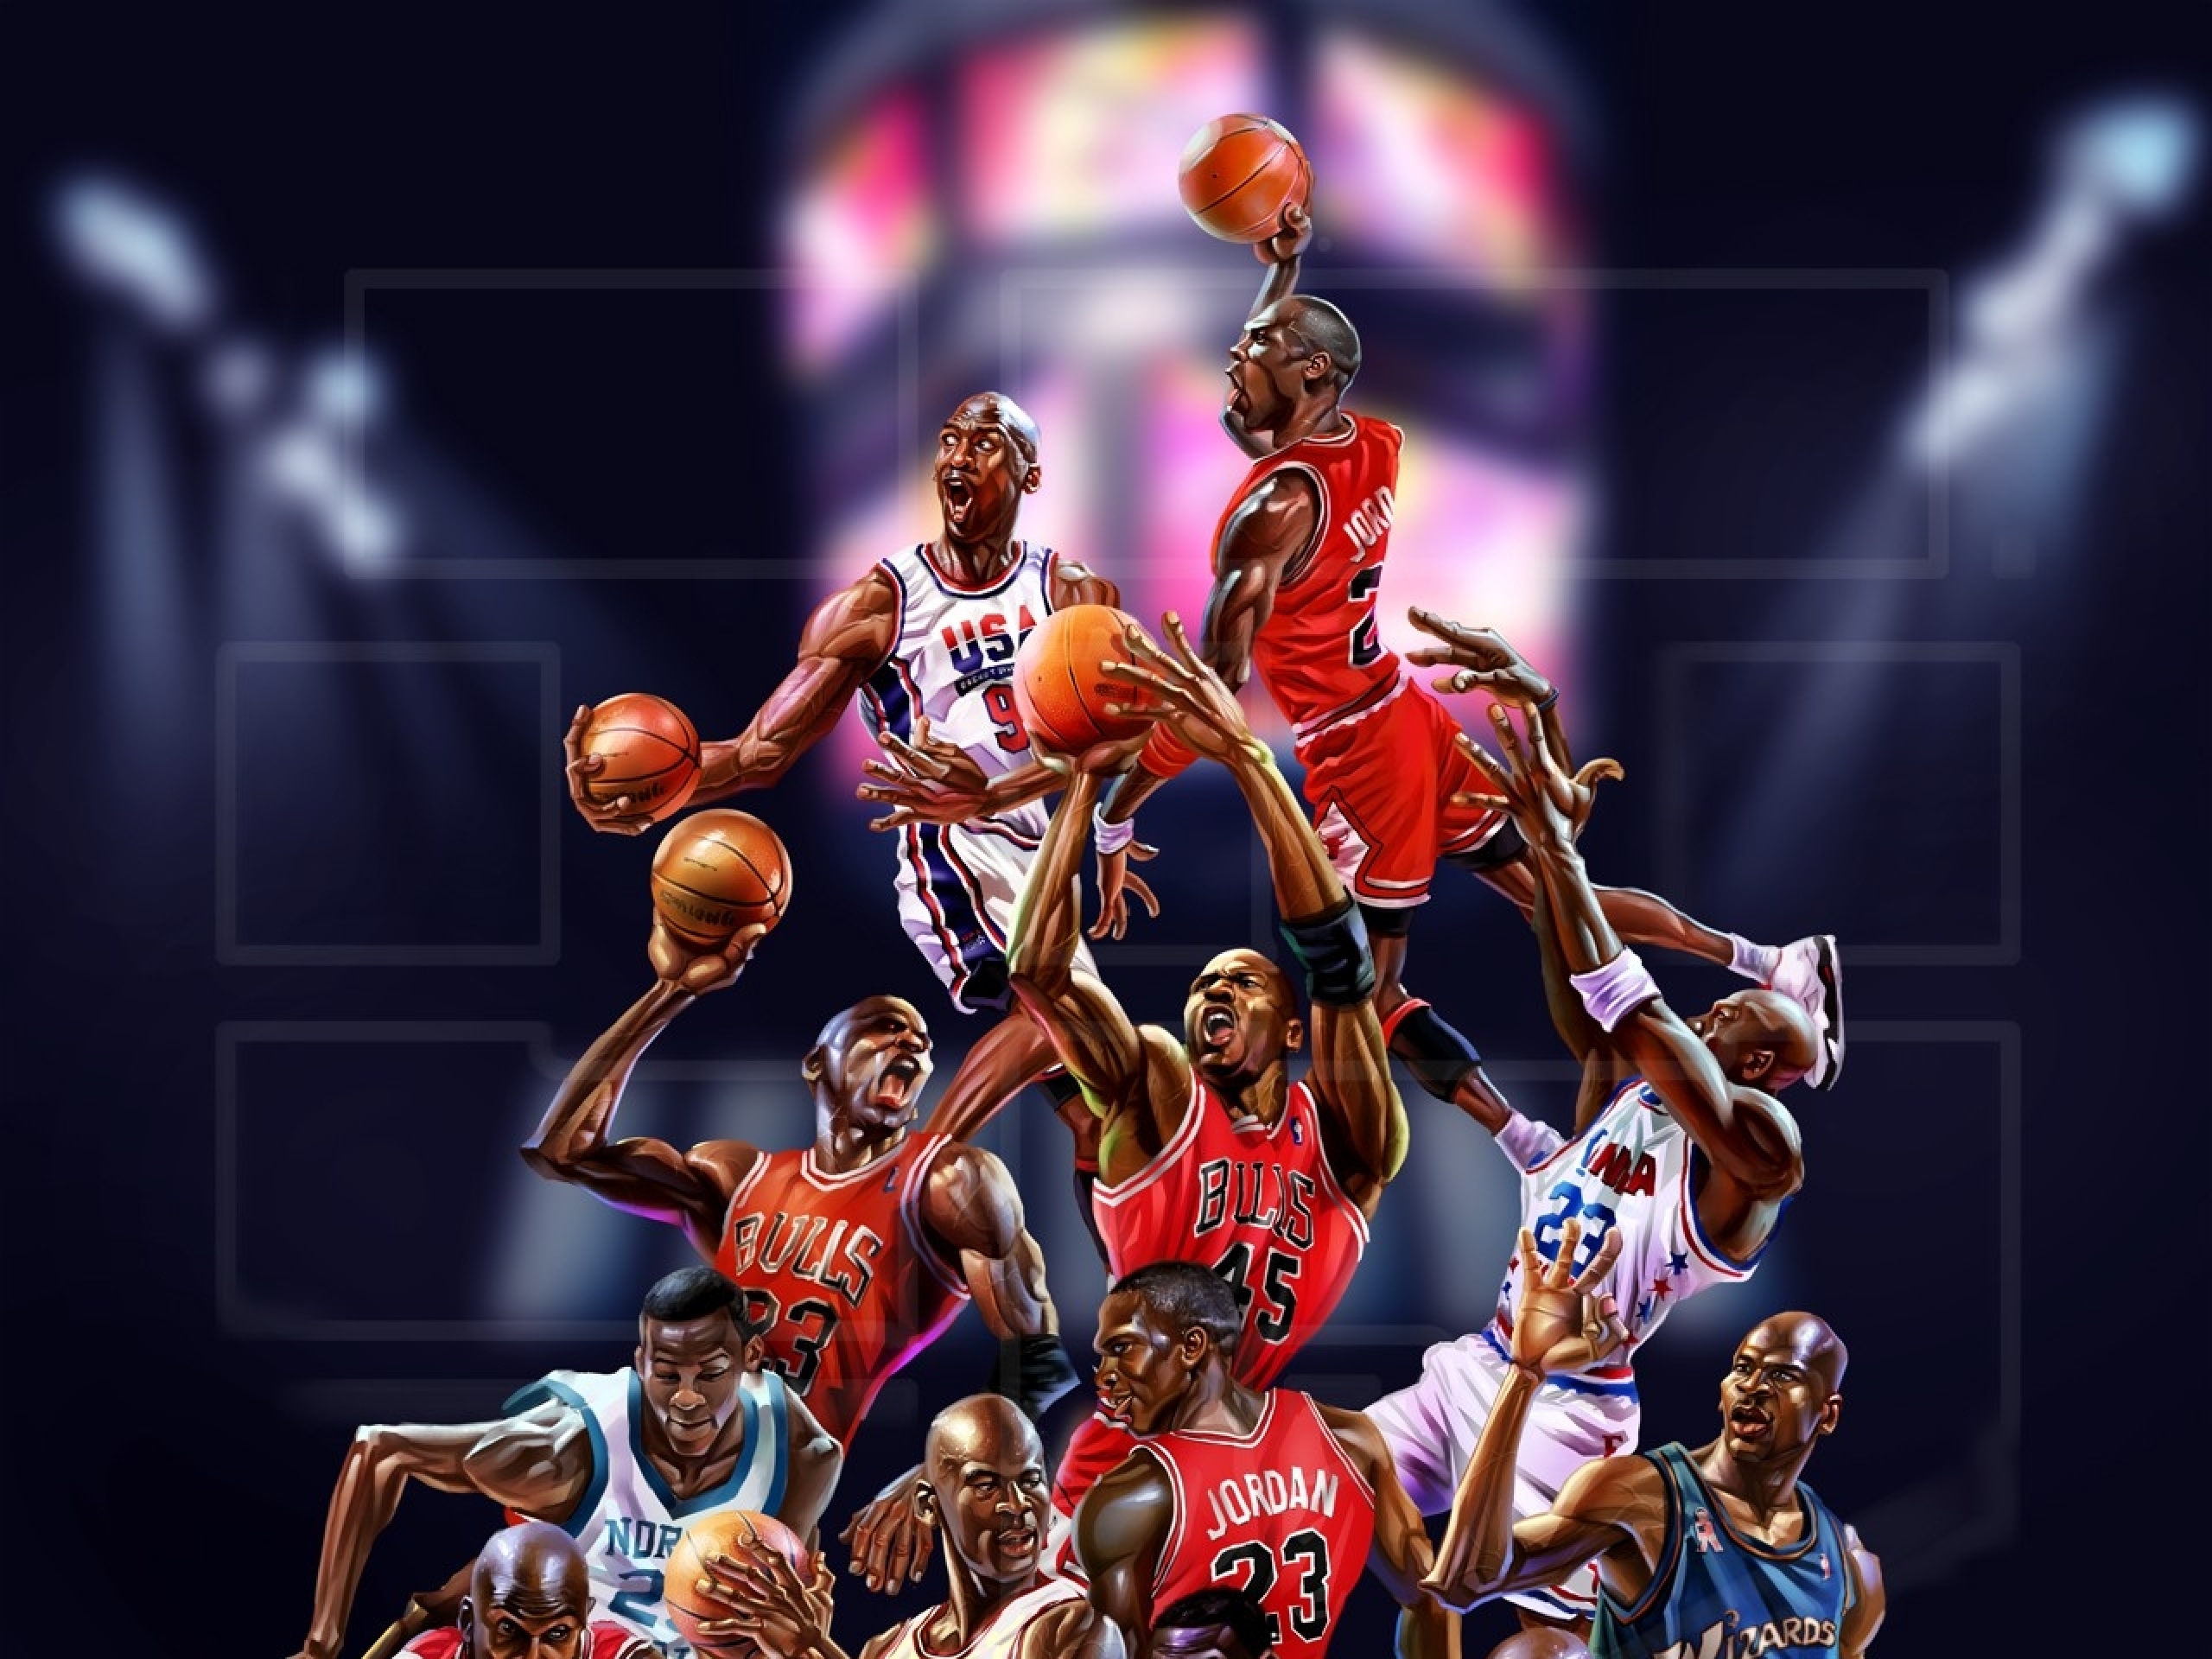  on September 17 2015 By Stephen Comments Off on NBA 2015 Wallpapers